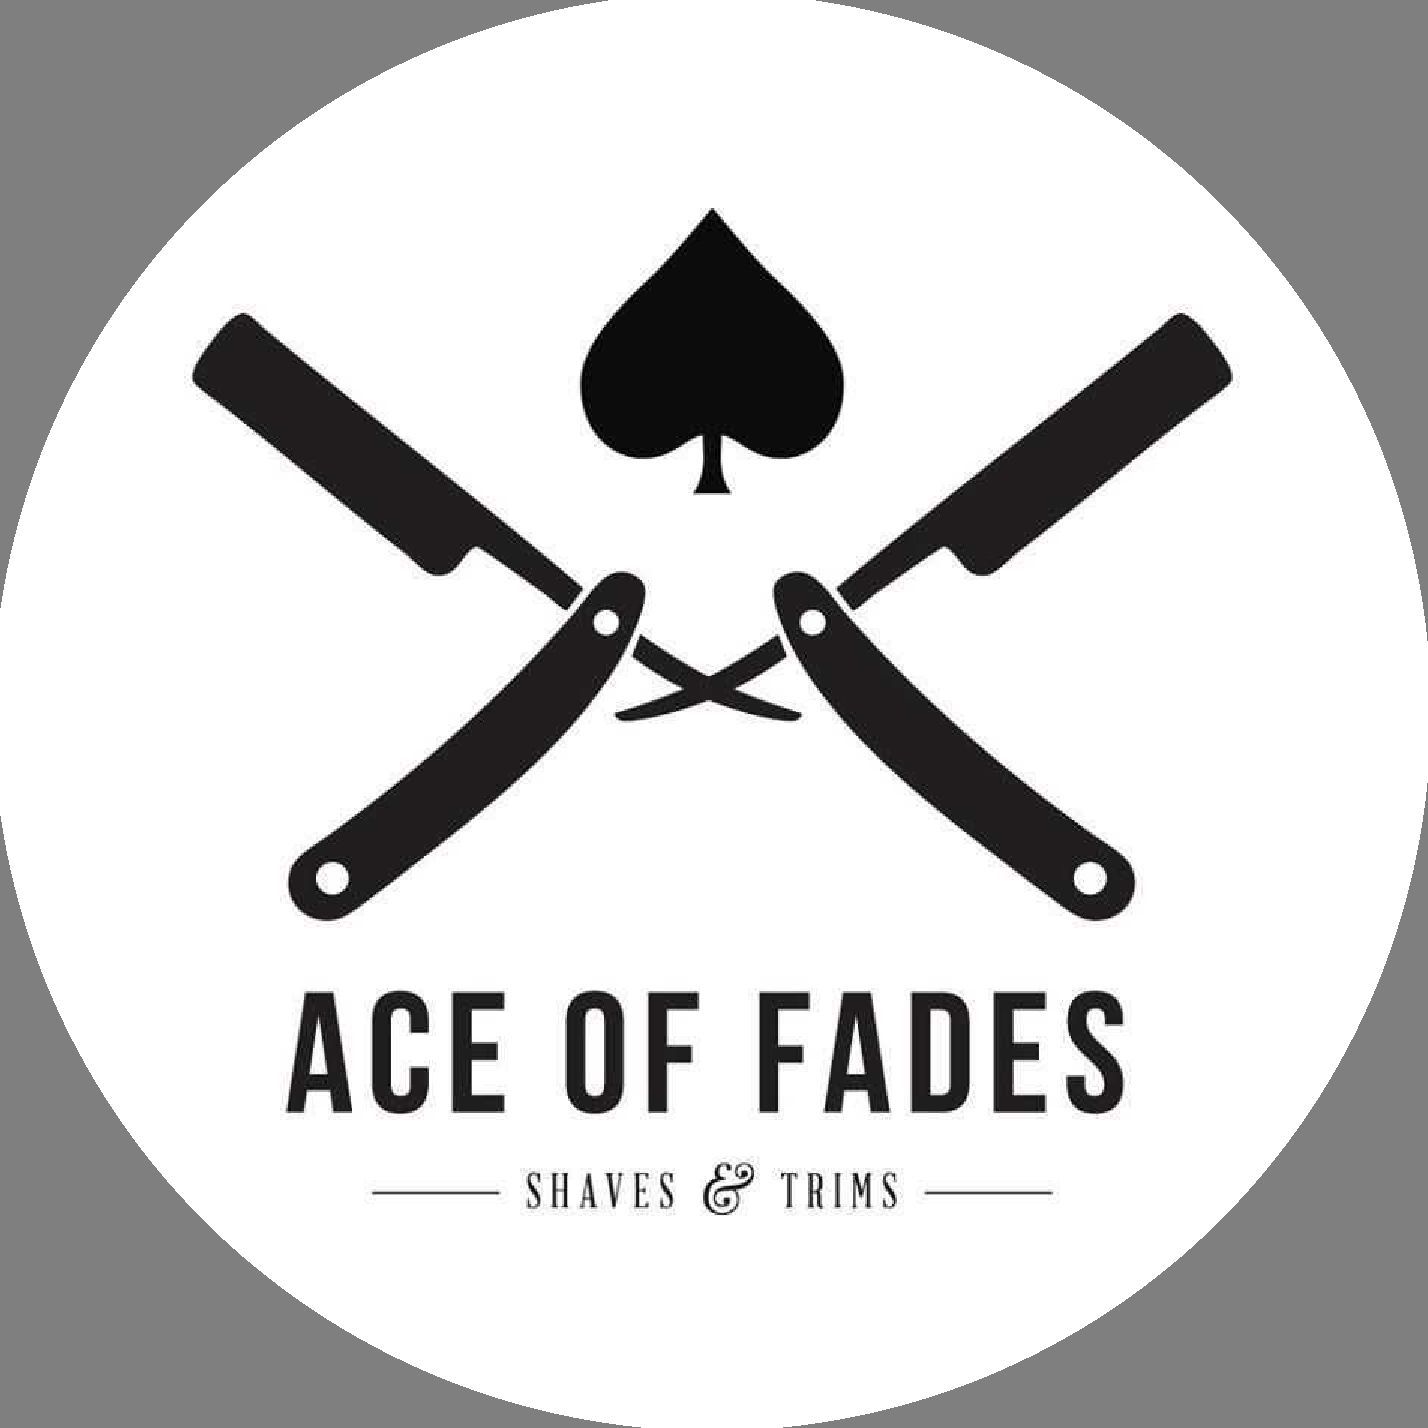 Ace Of Fades Barber Shop, 128 8th Ave, New York, 10011